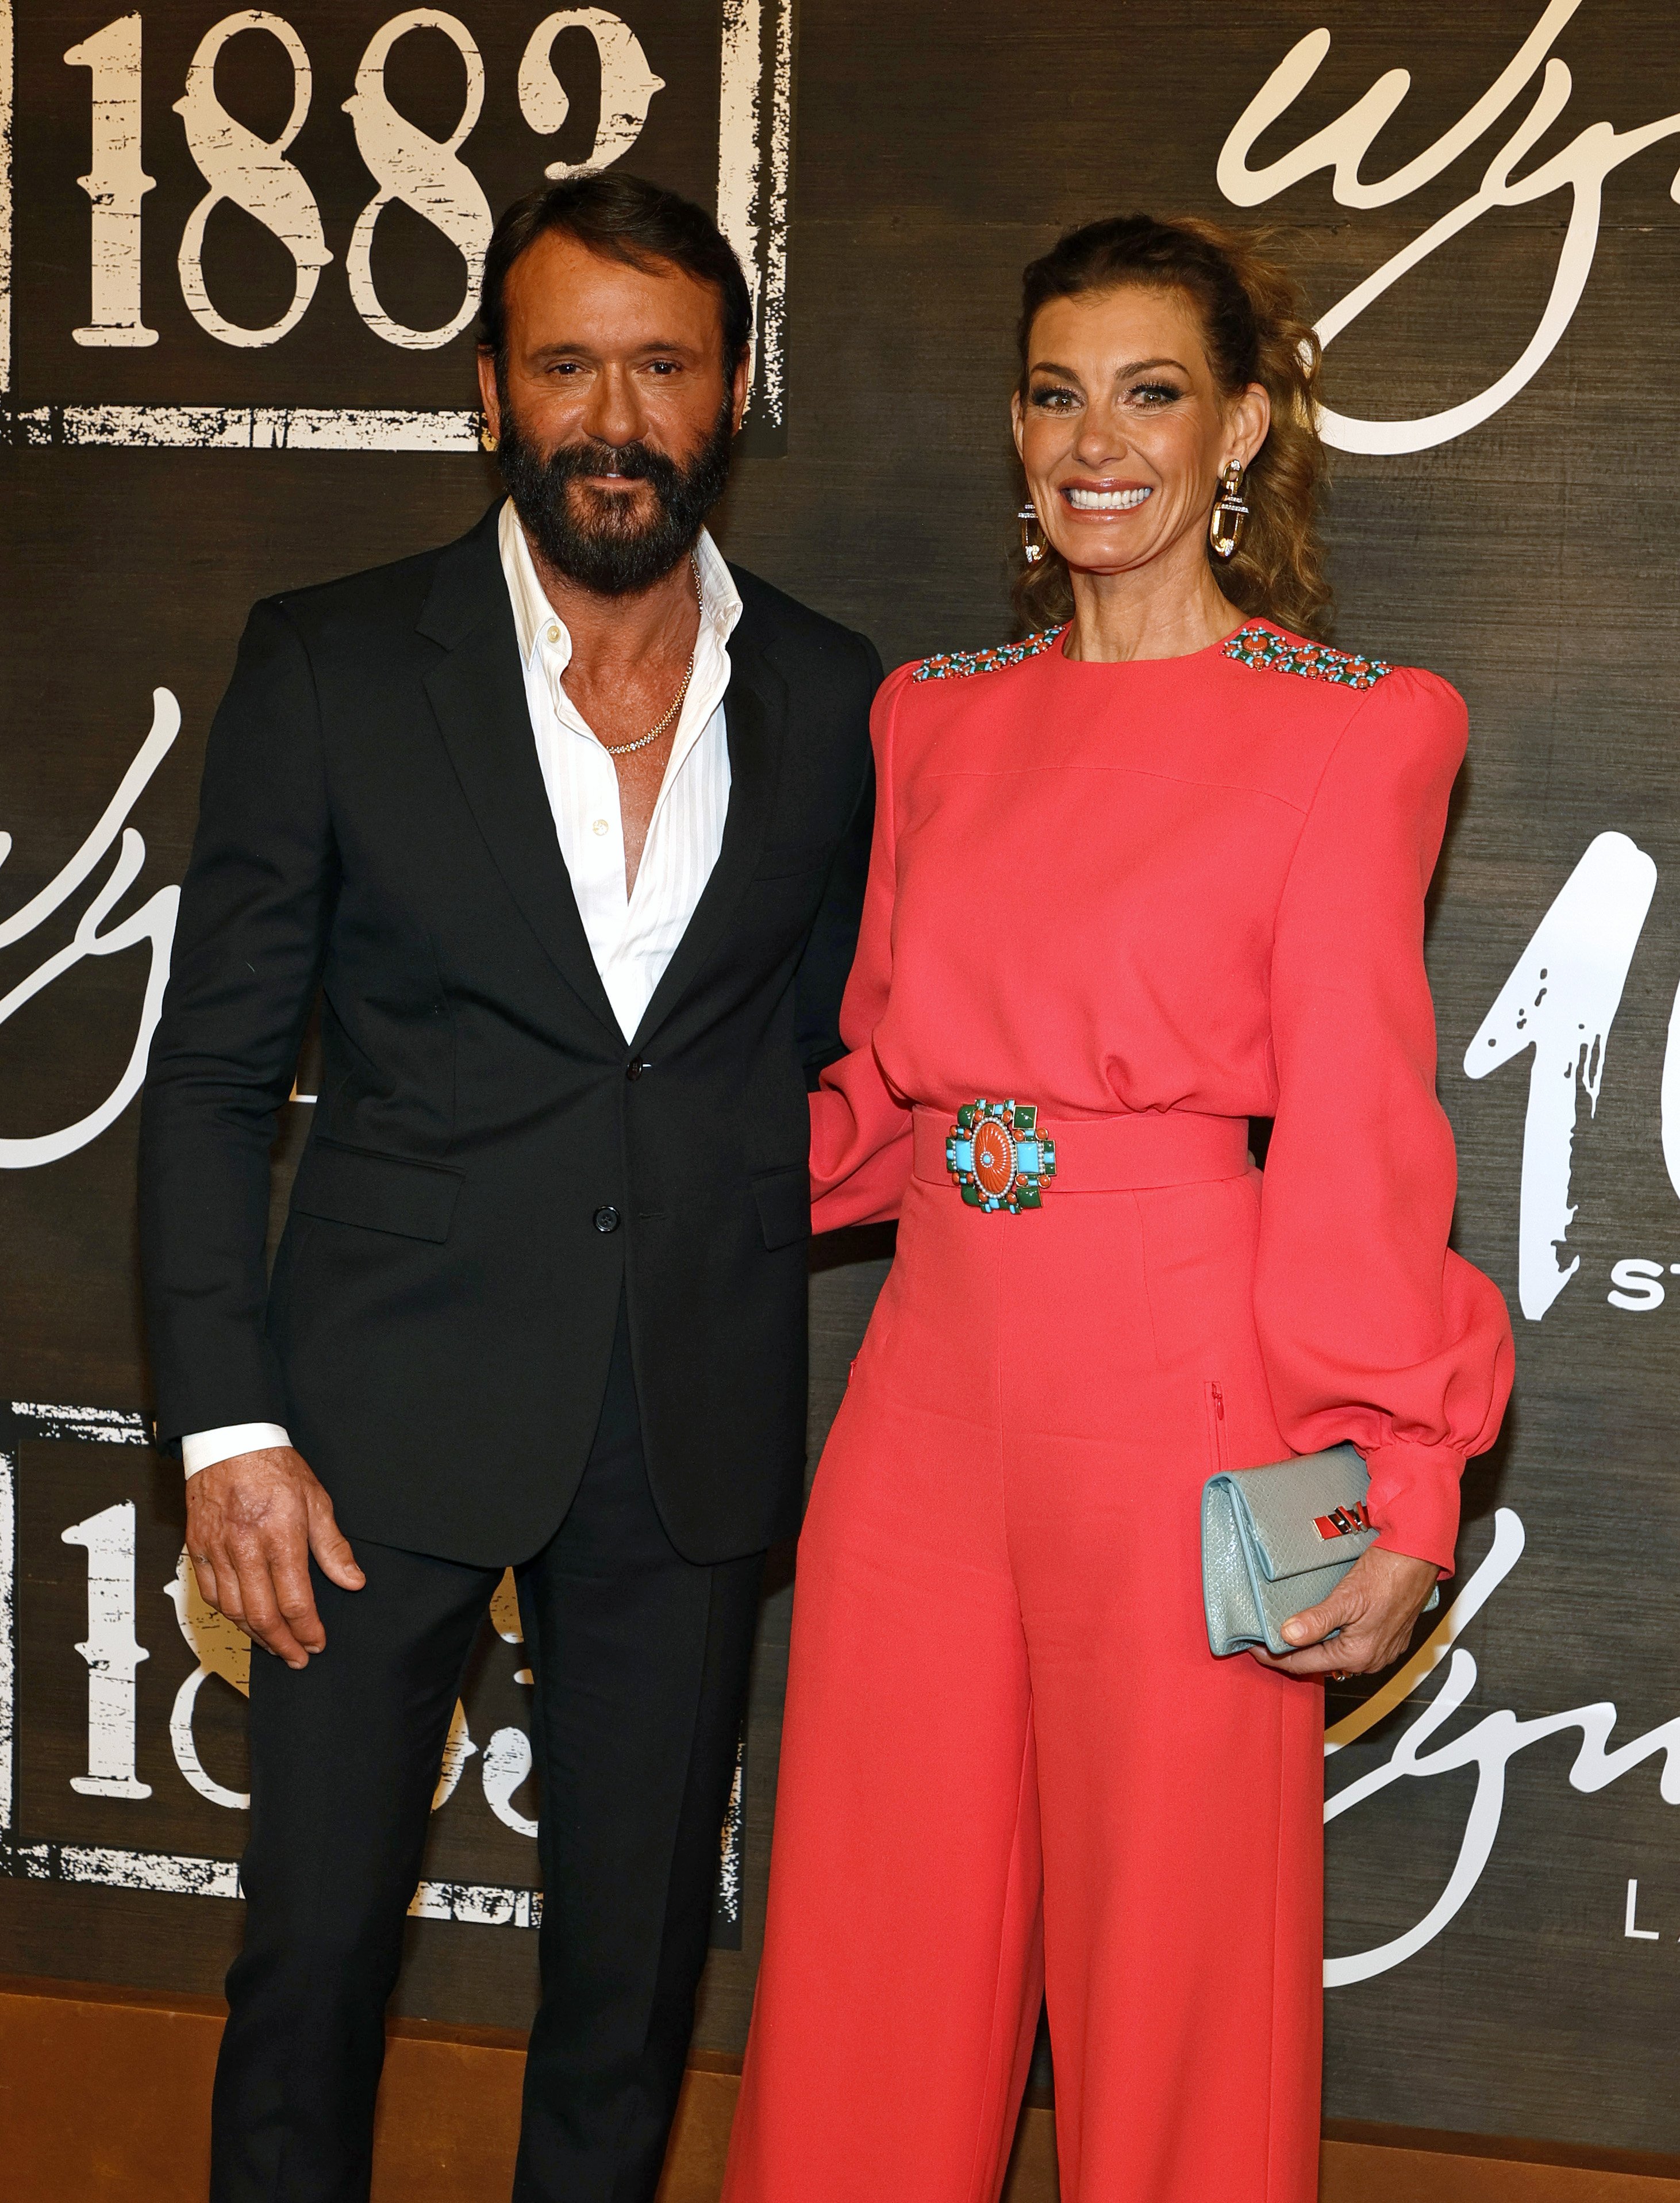 Tim McGraw and Faith Hill arrive at the world premiere of "1883" at Encore Beach Club at Wynn Las Vegas on December 11, 2021, in Las Vegas, Nevada. | Source: Getty Images